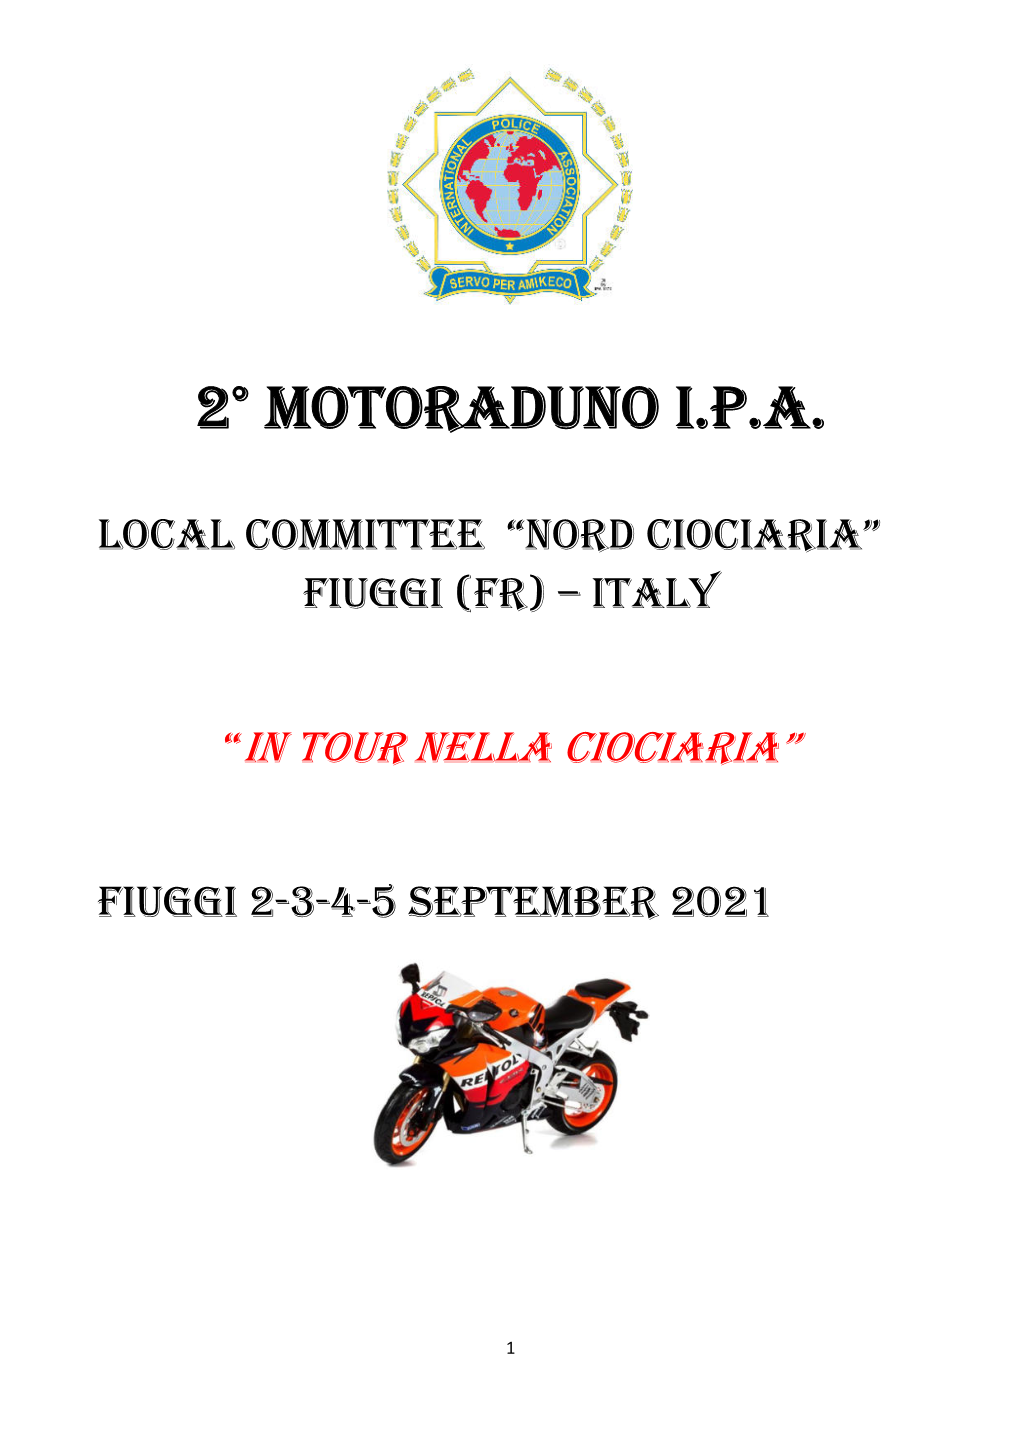 IPA Nord Ciociaria 2Nd Motorcycle Rally Programme + Registration Form